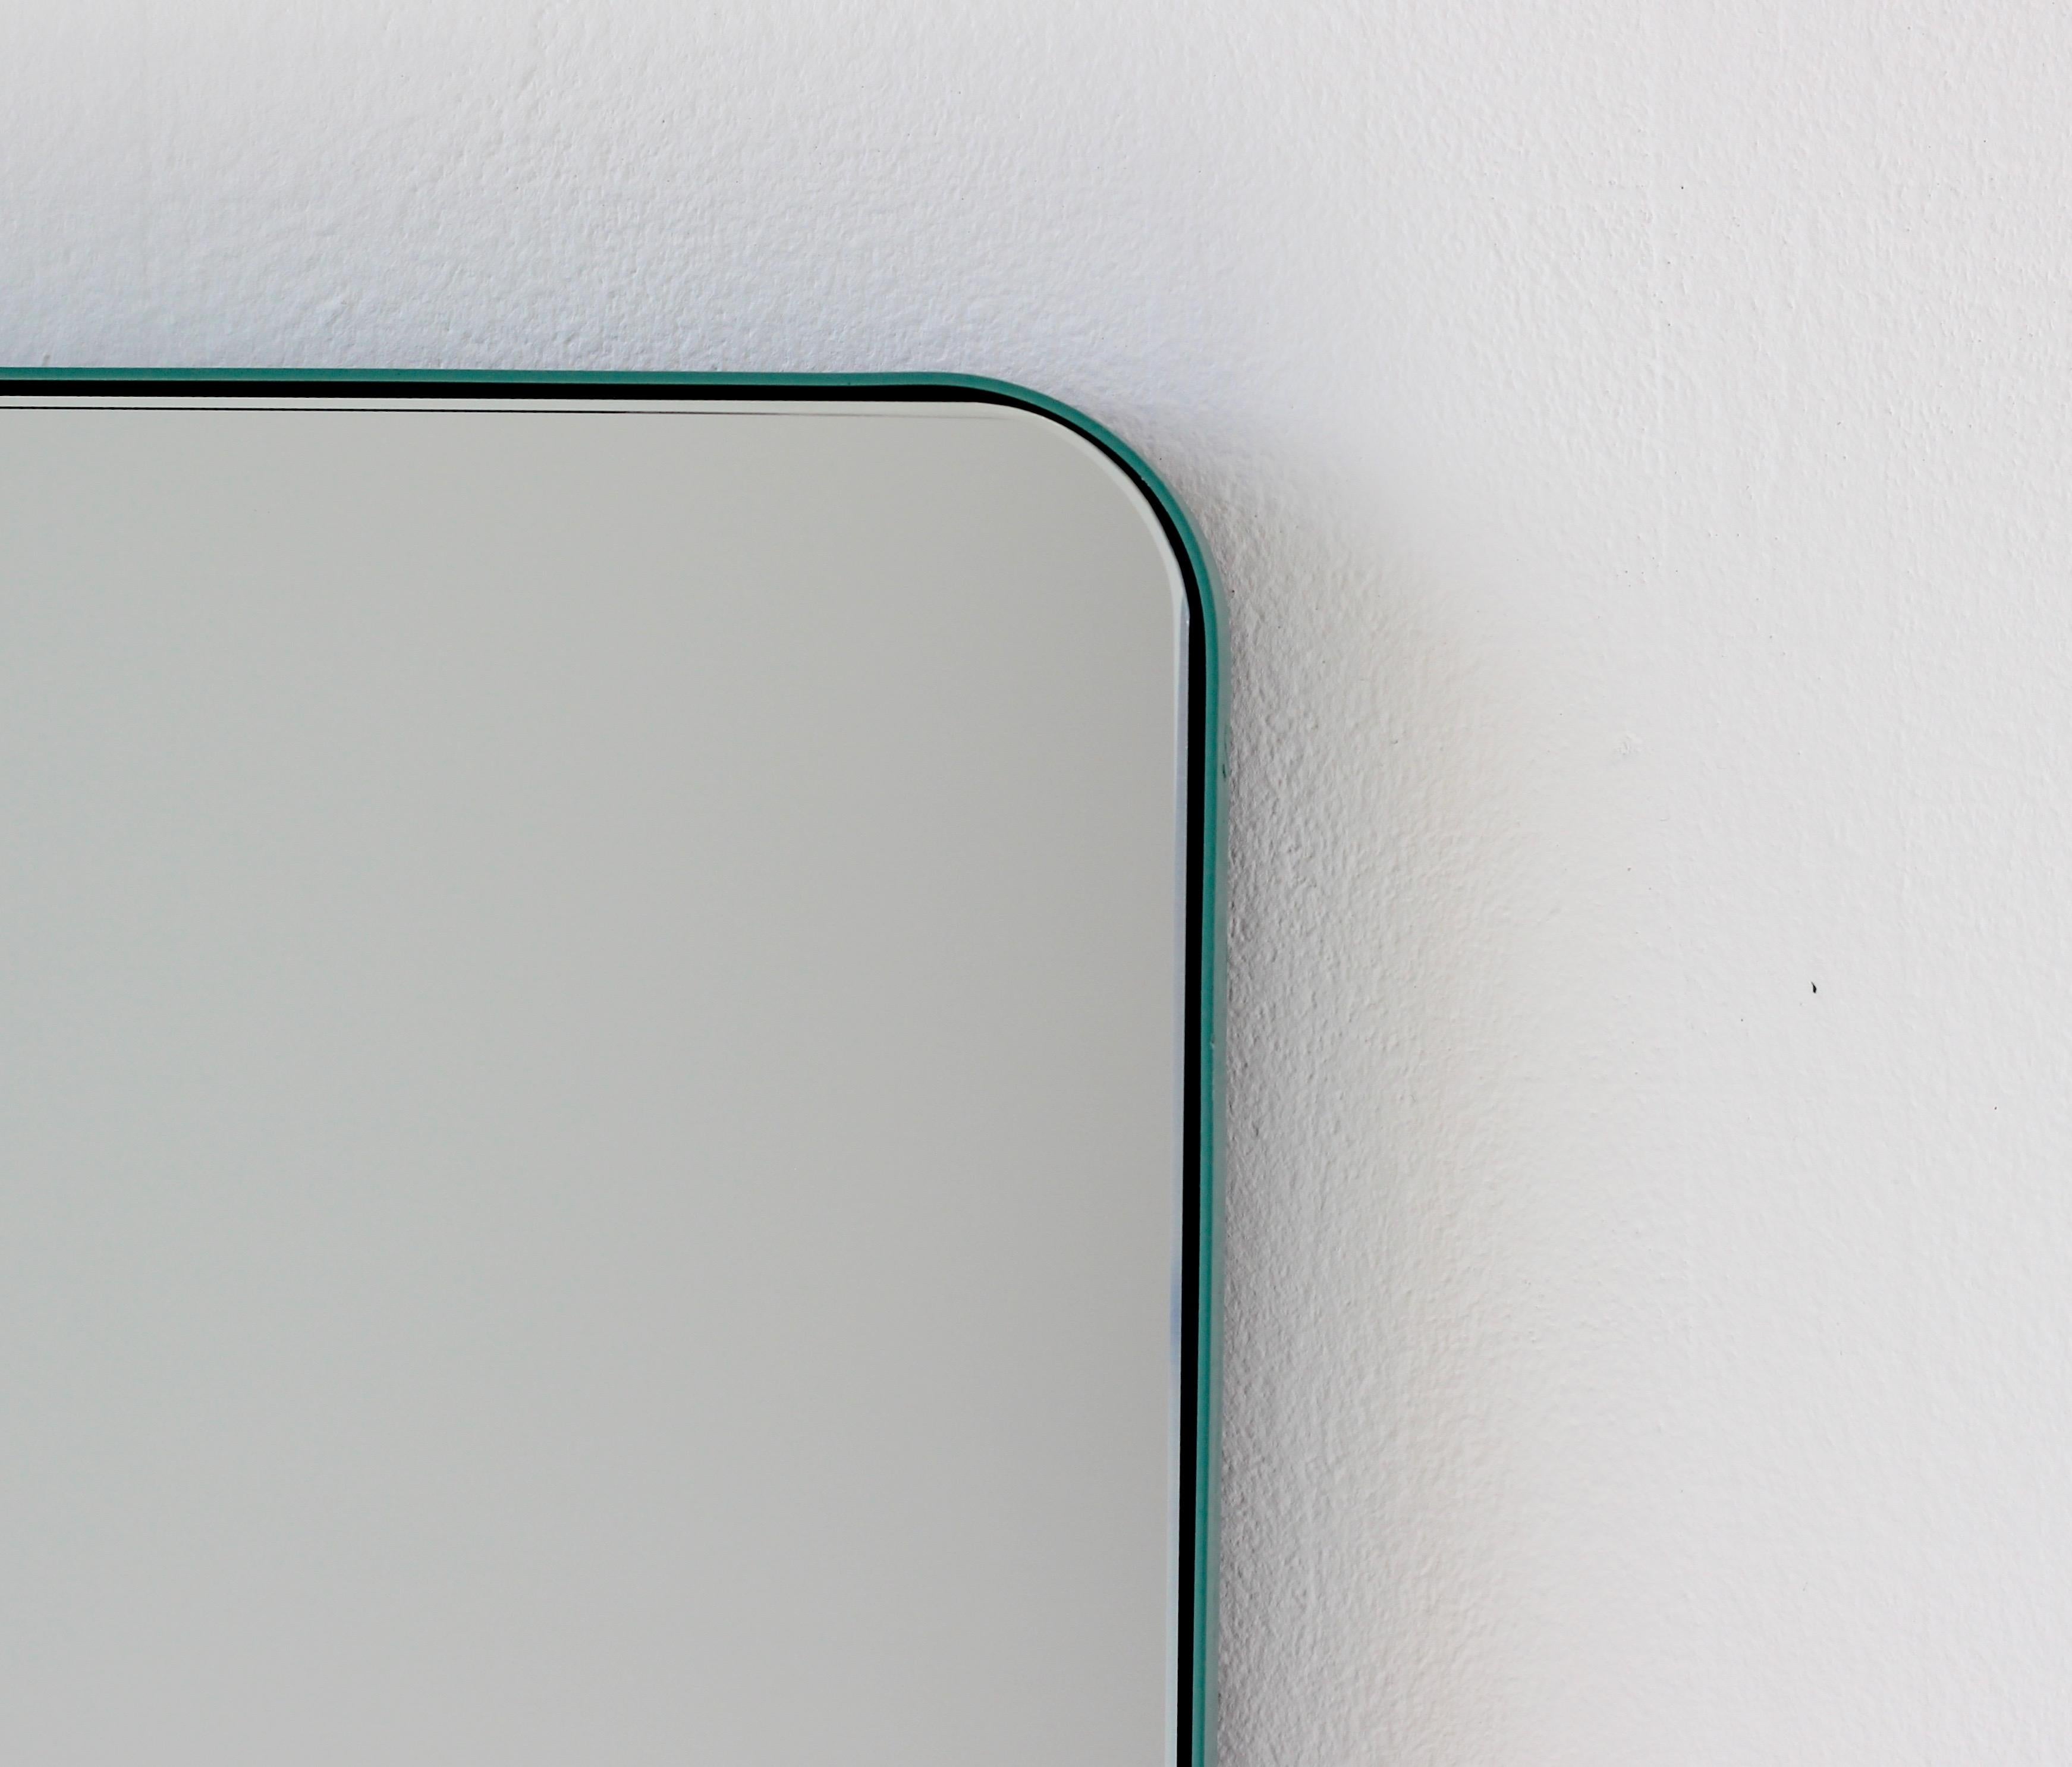 Quadris Rectangular Modern Mirror Mint Turquoise Frame, Large In New Condition For Sale In London, GB